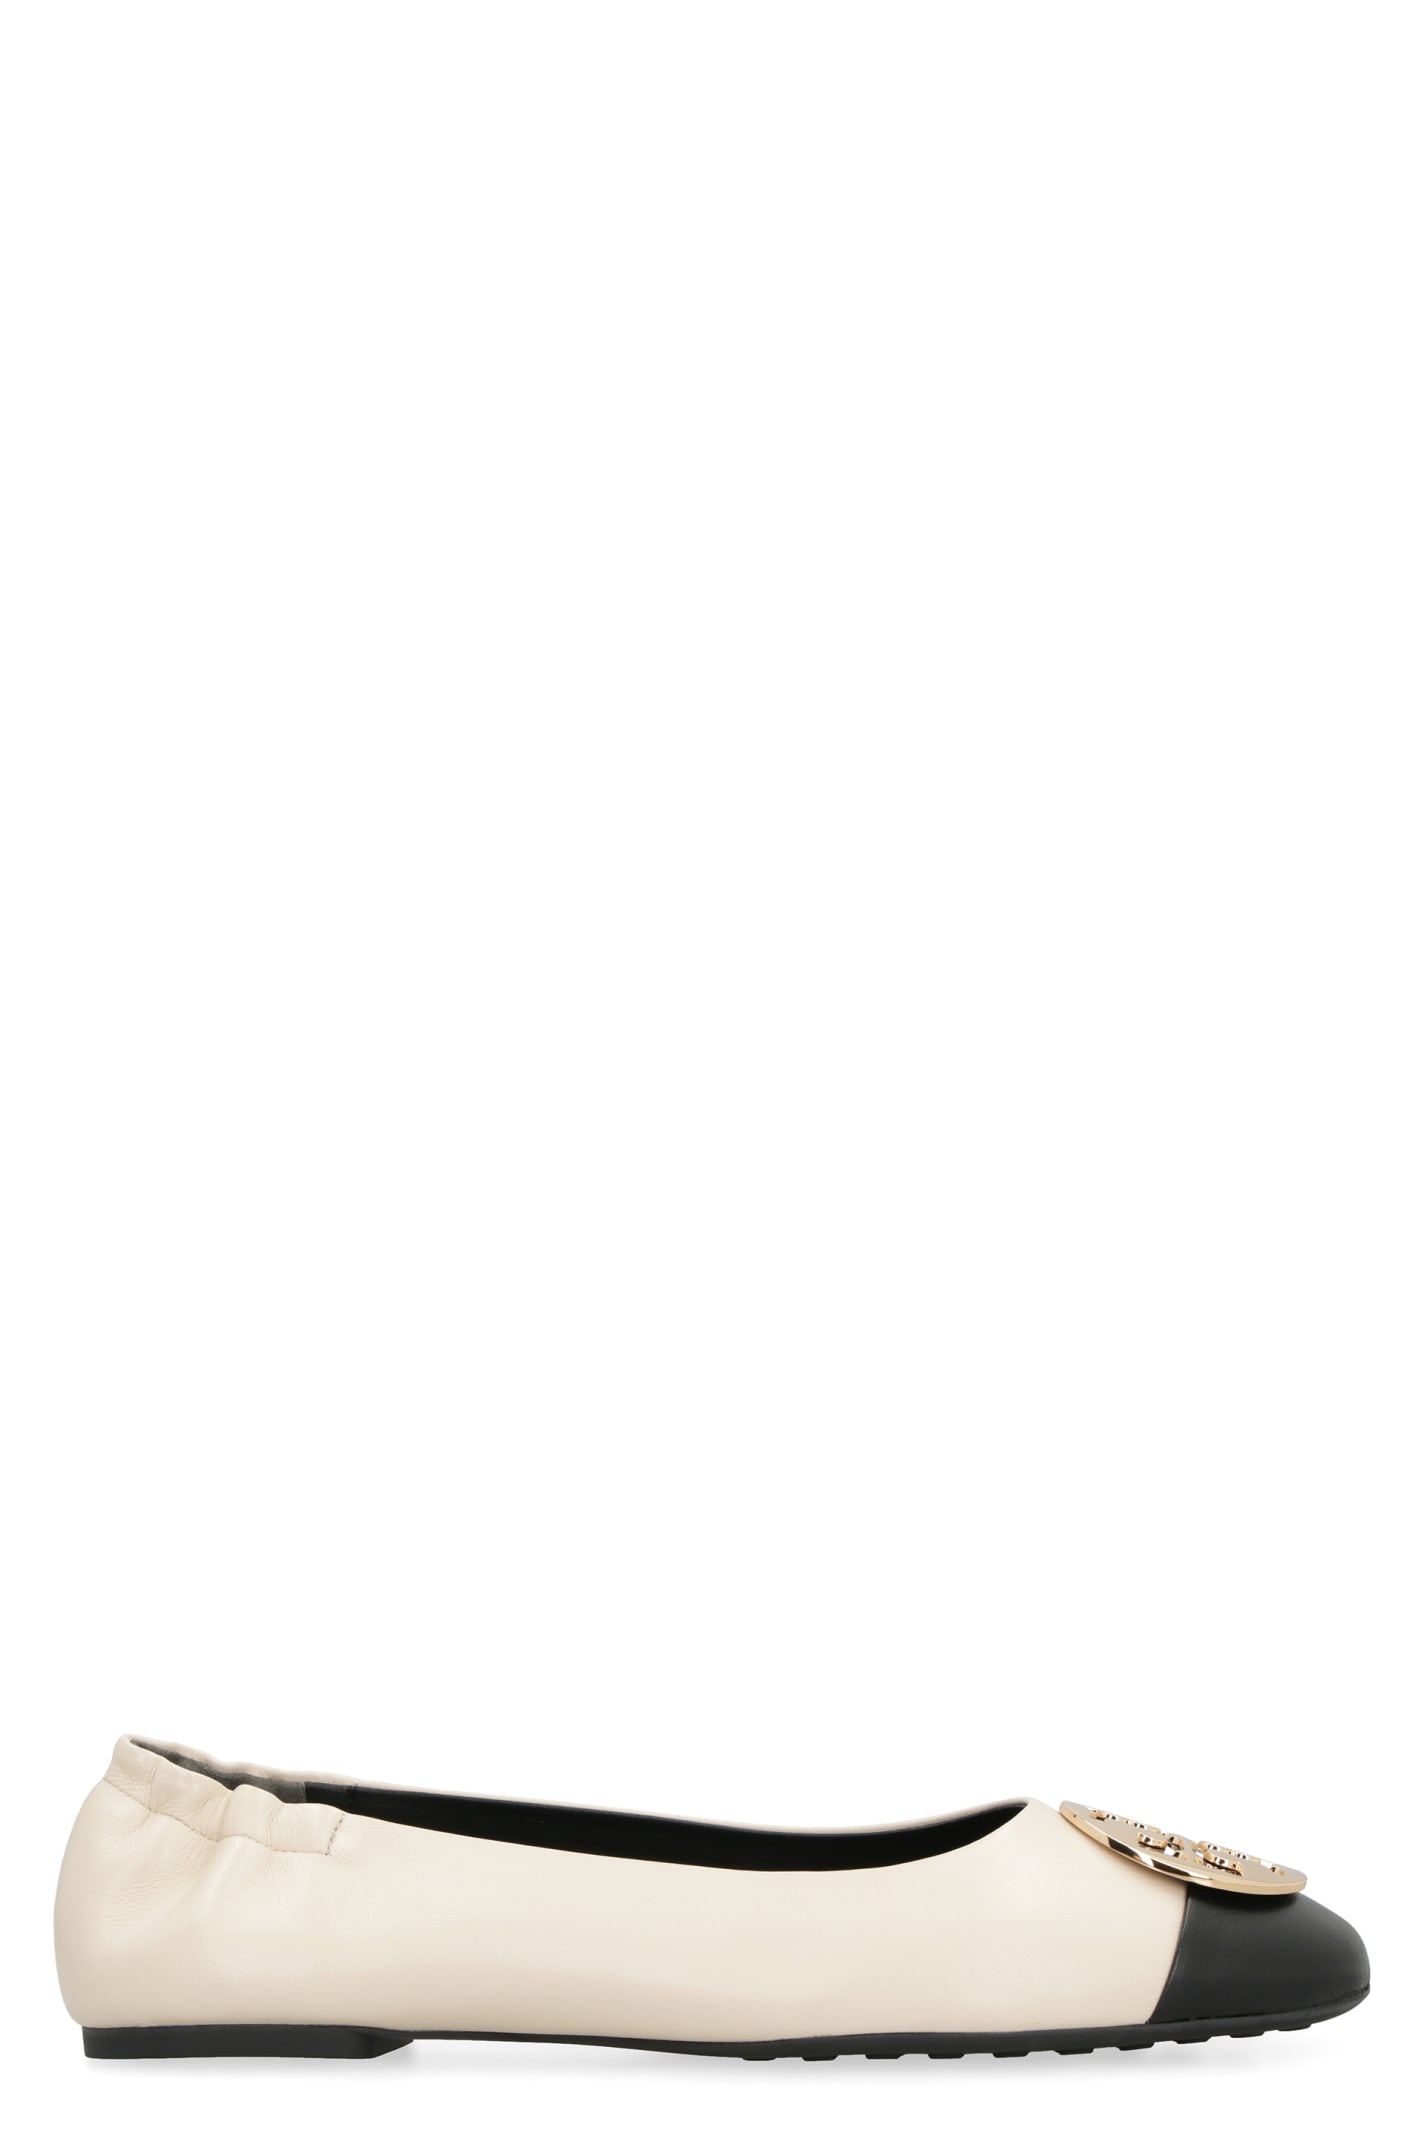 Tory Burch Claire Leather Ballet Flats In Gold